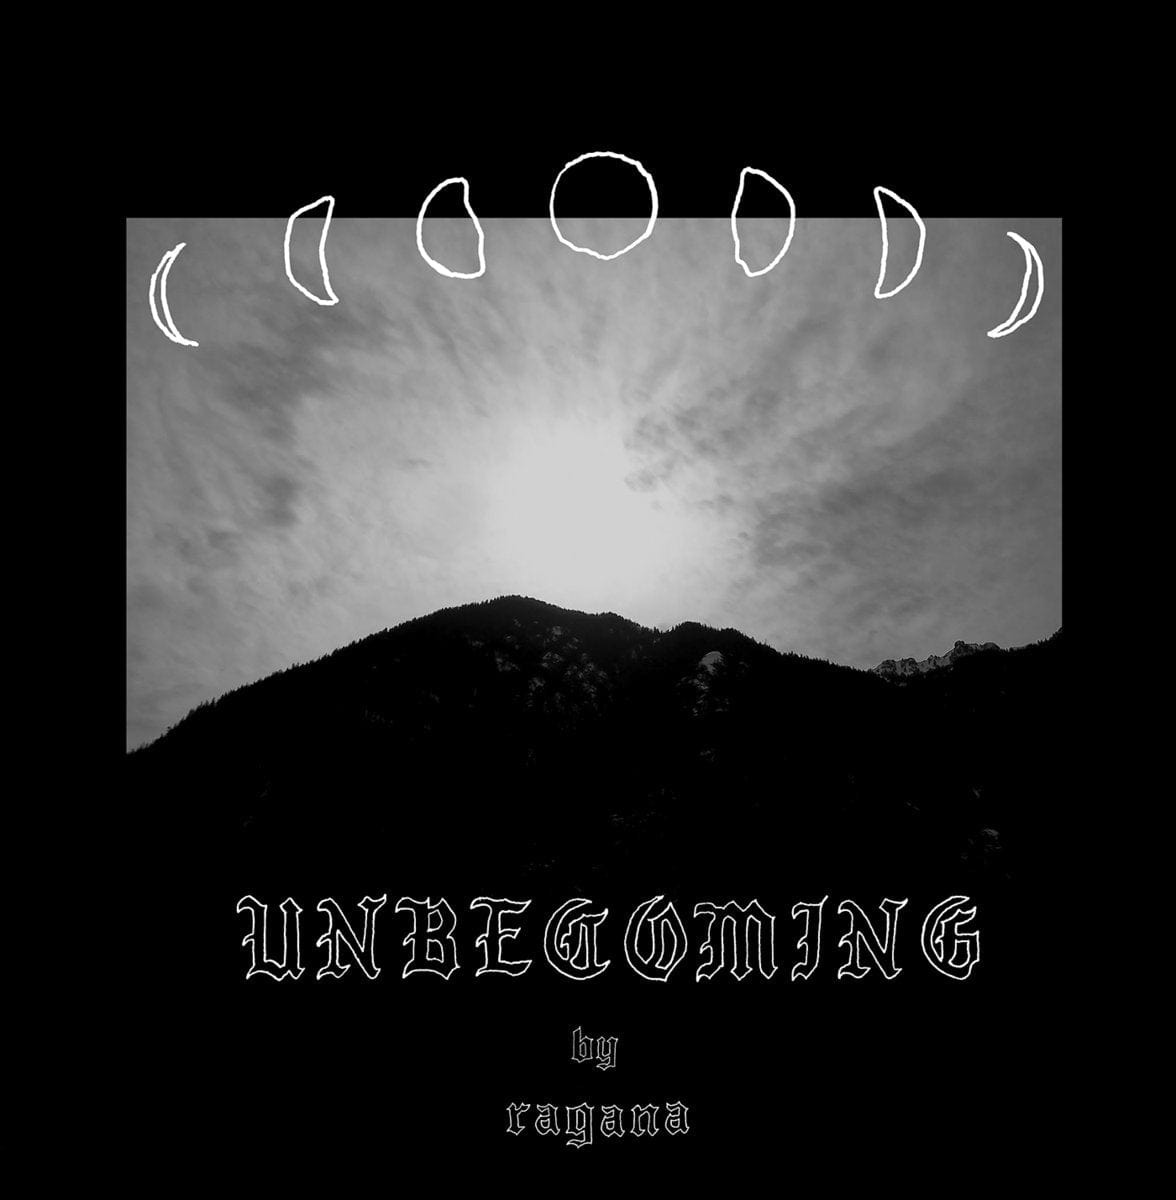 An Out Recordings Tapes Ragana "Unbecoming" Tape